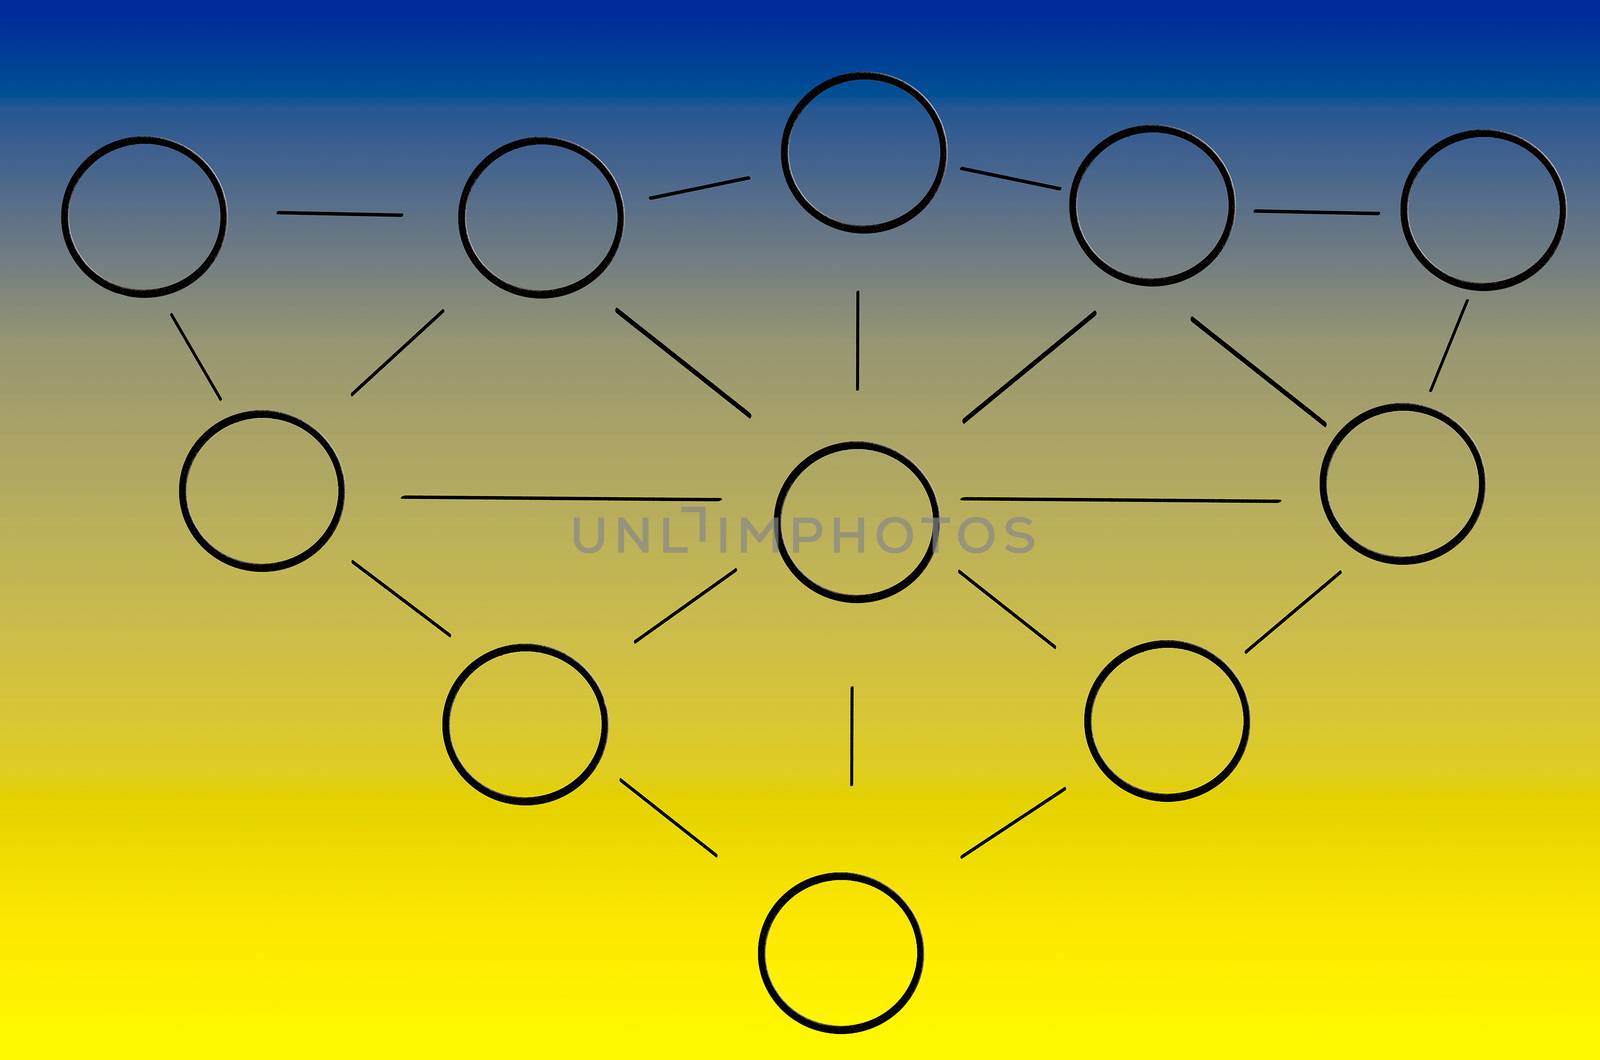 Various circuit connected with lines. Symbolizes network.